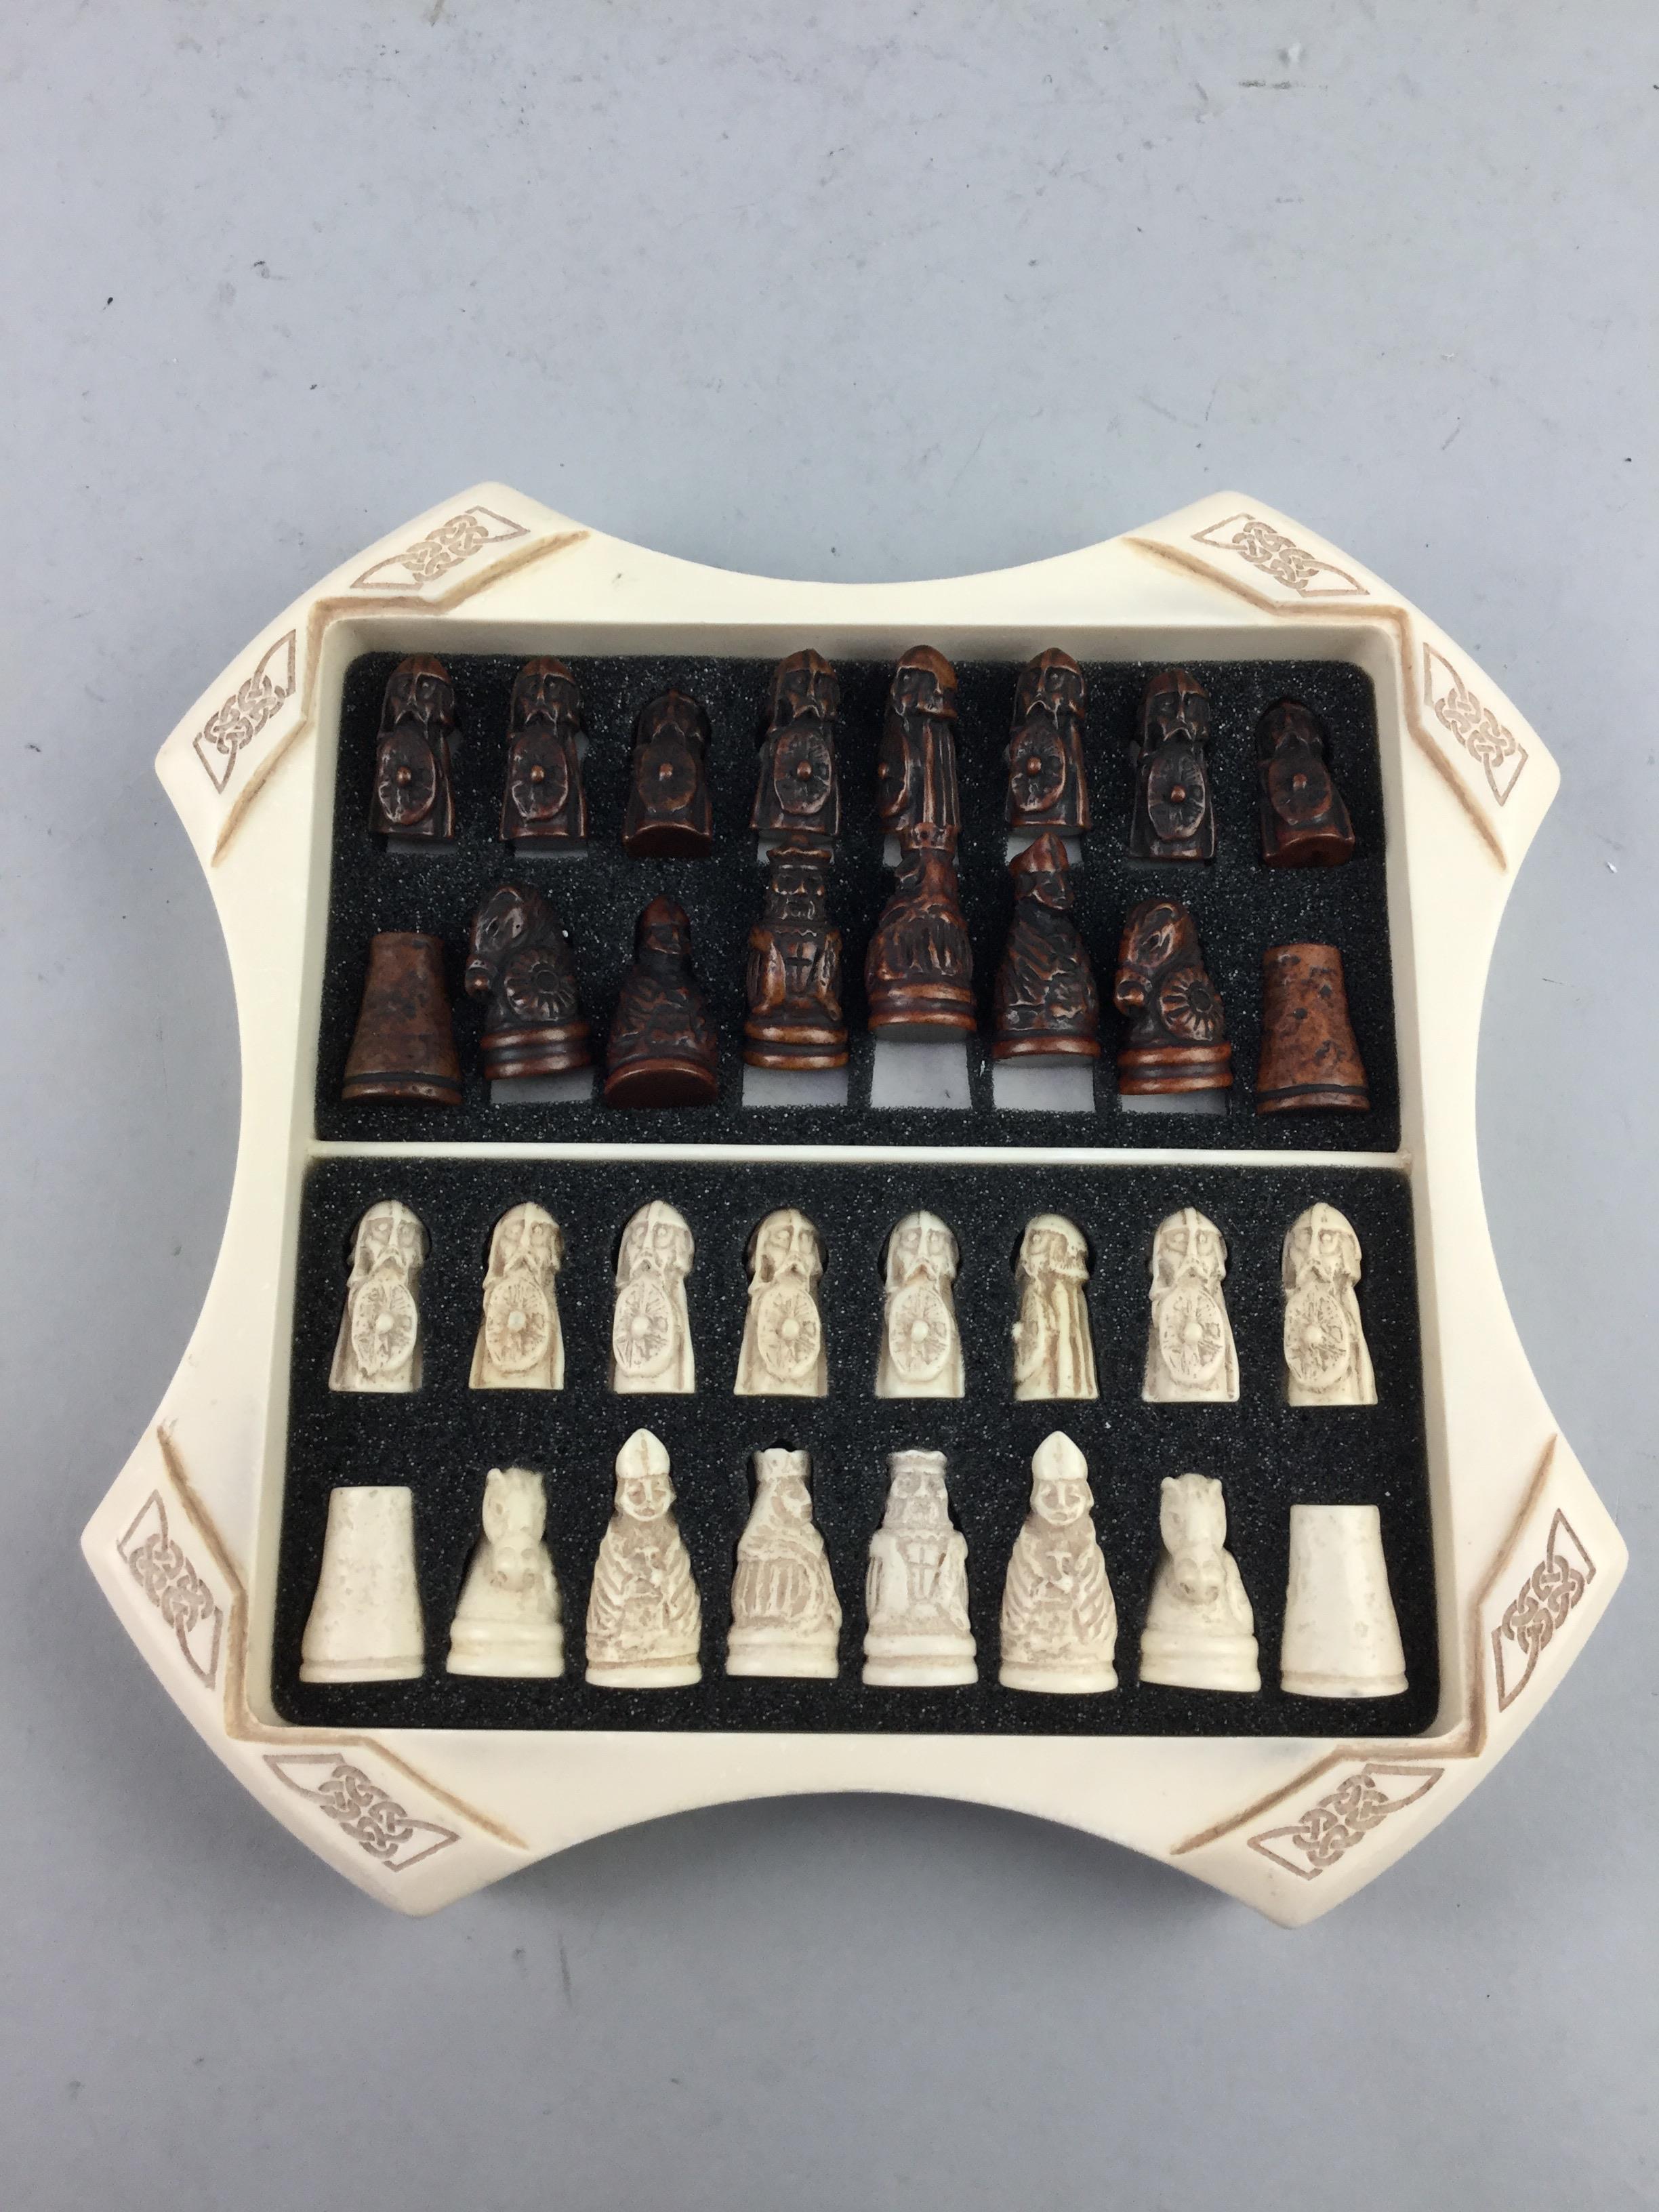 A RESIN ISLE OF LEWIS CHESS SET